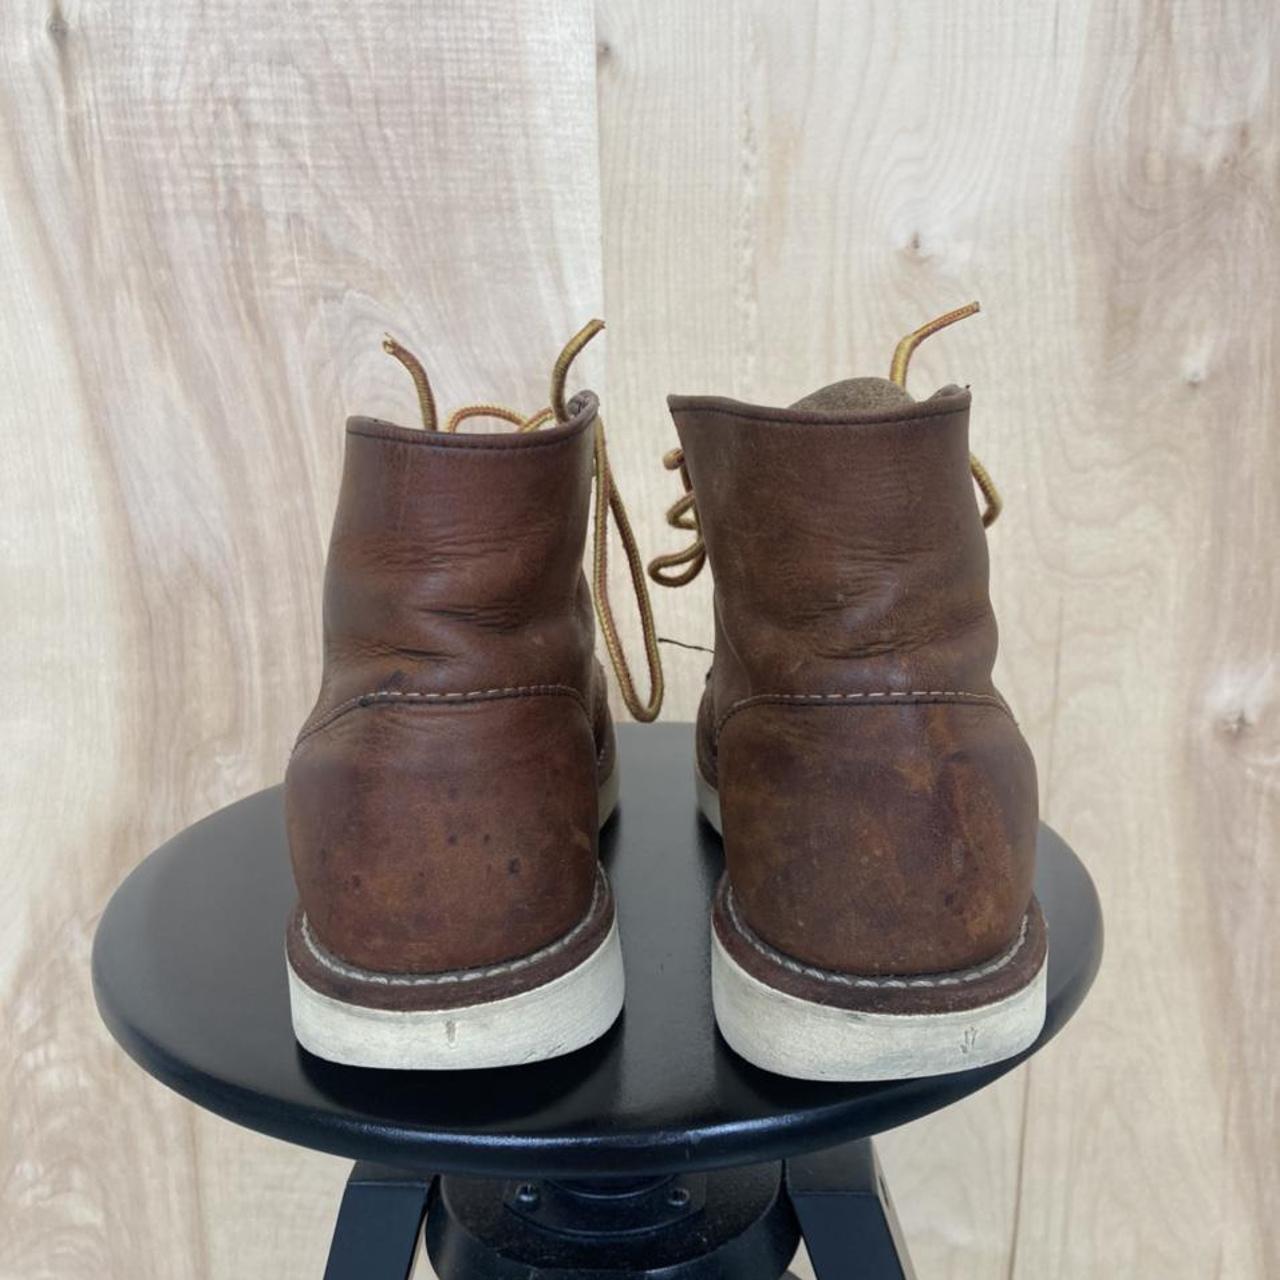 Product Image 2 - Red wings boots in brown